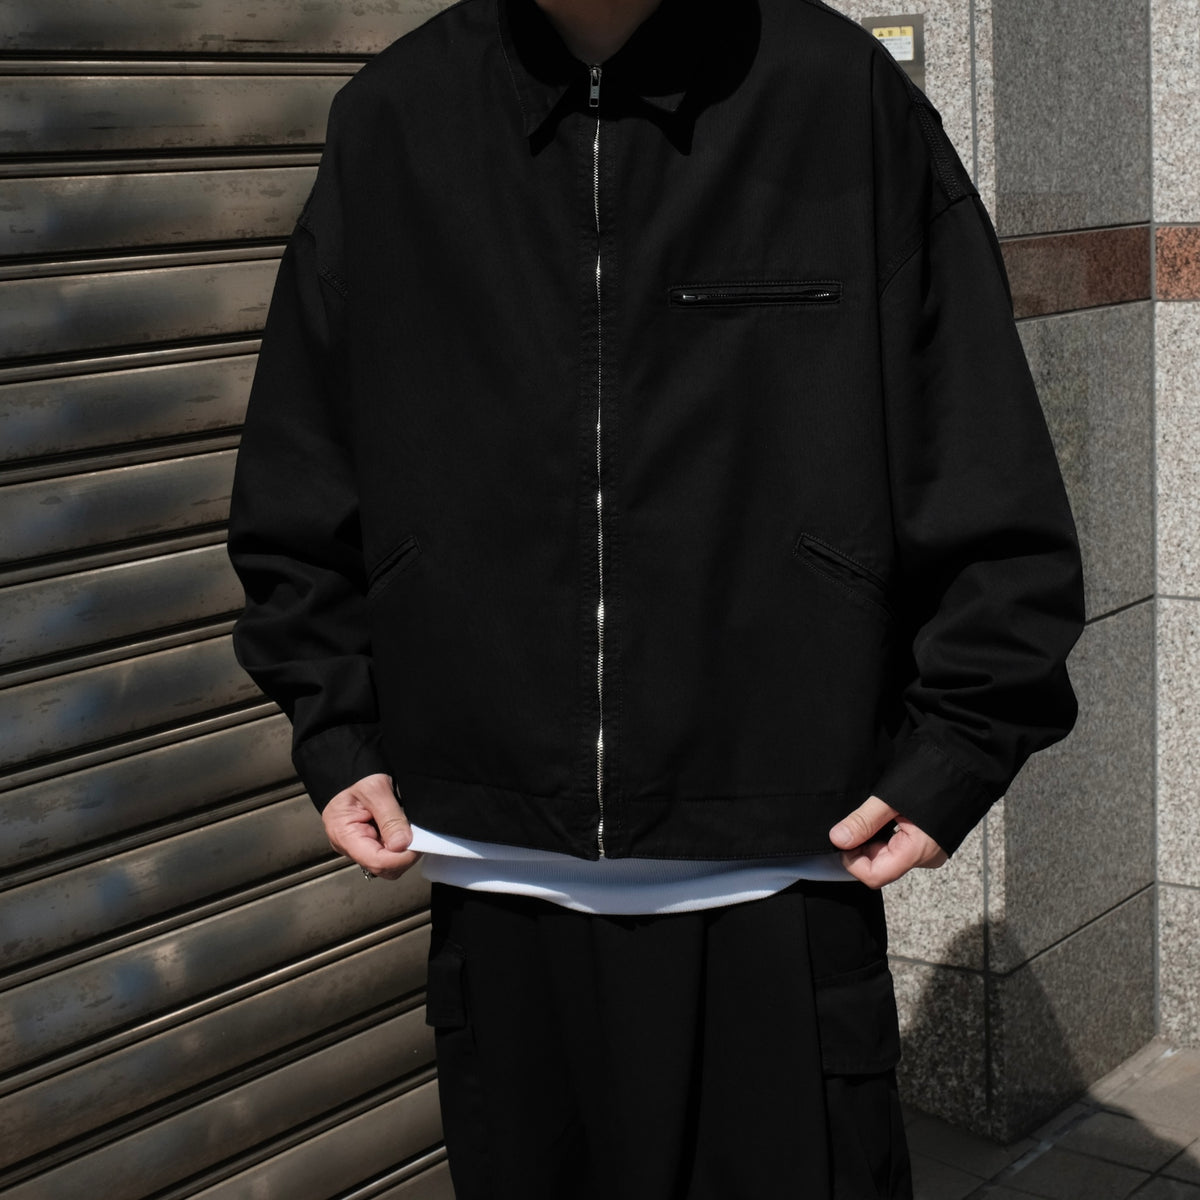 WILLY CHAVARRIA / DOWNTOWN JACKET WILLY BLACK TWILL